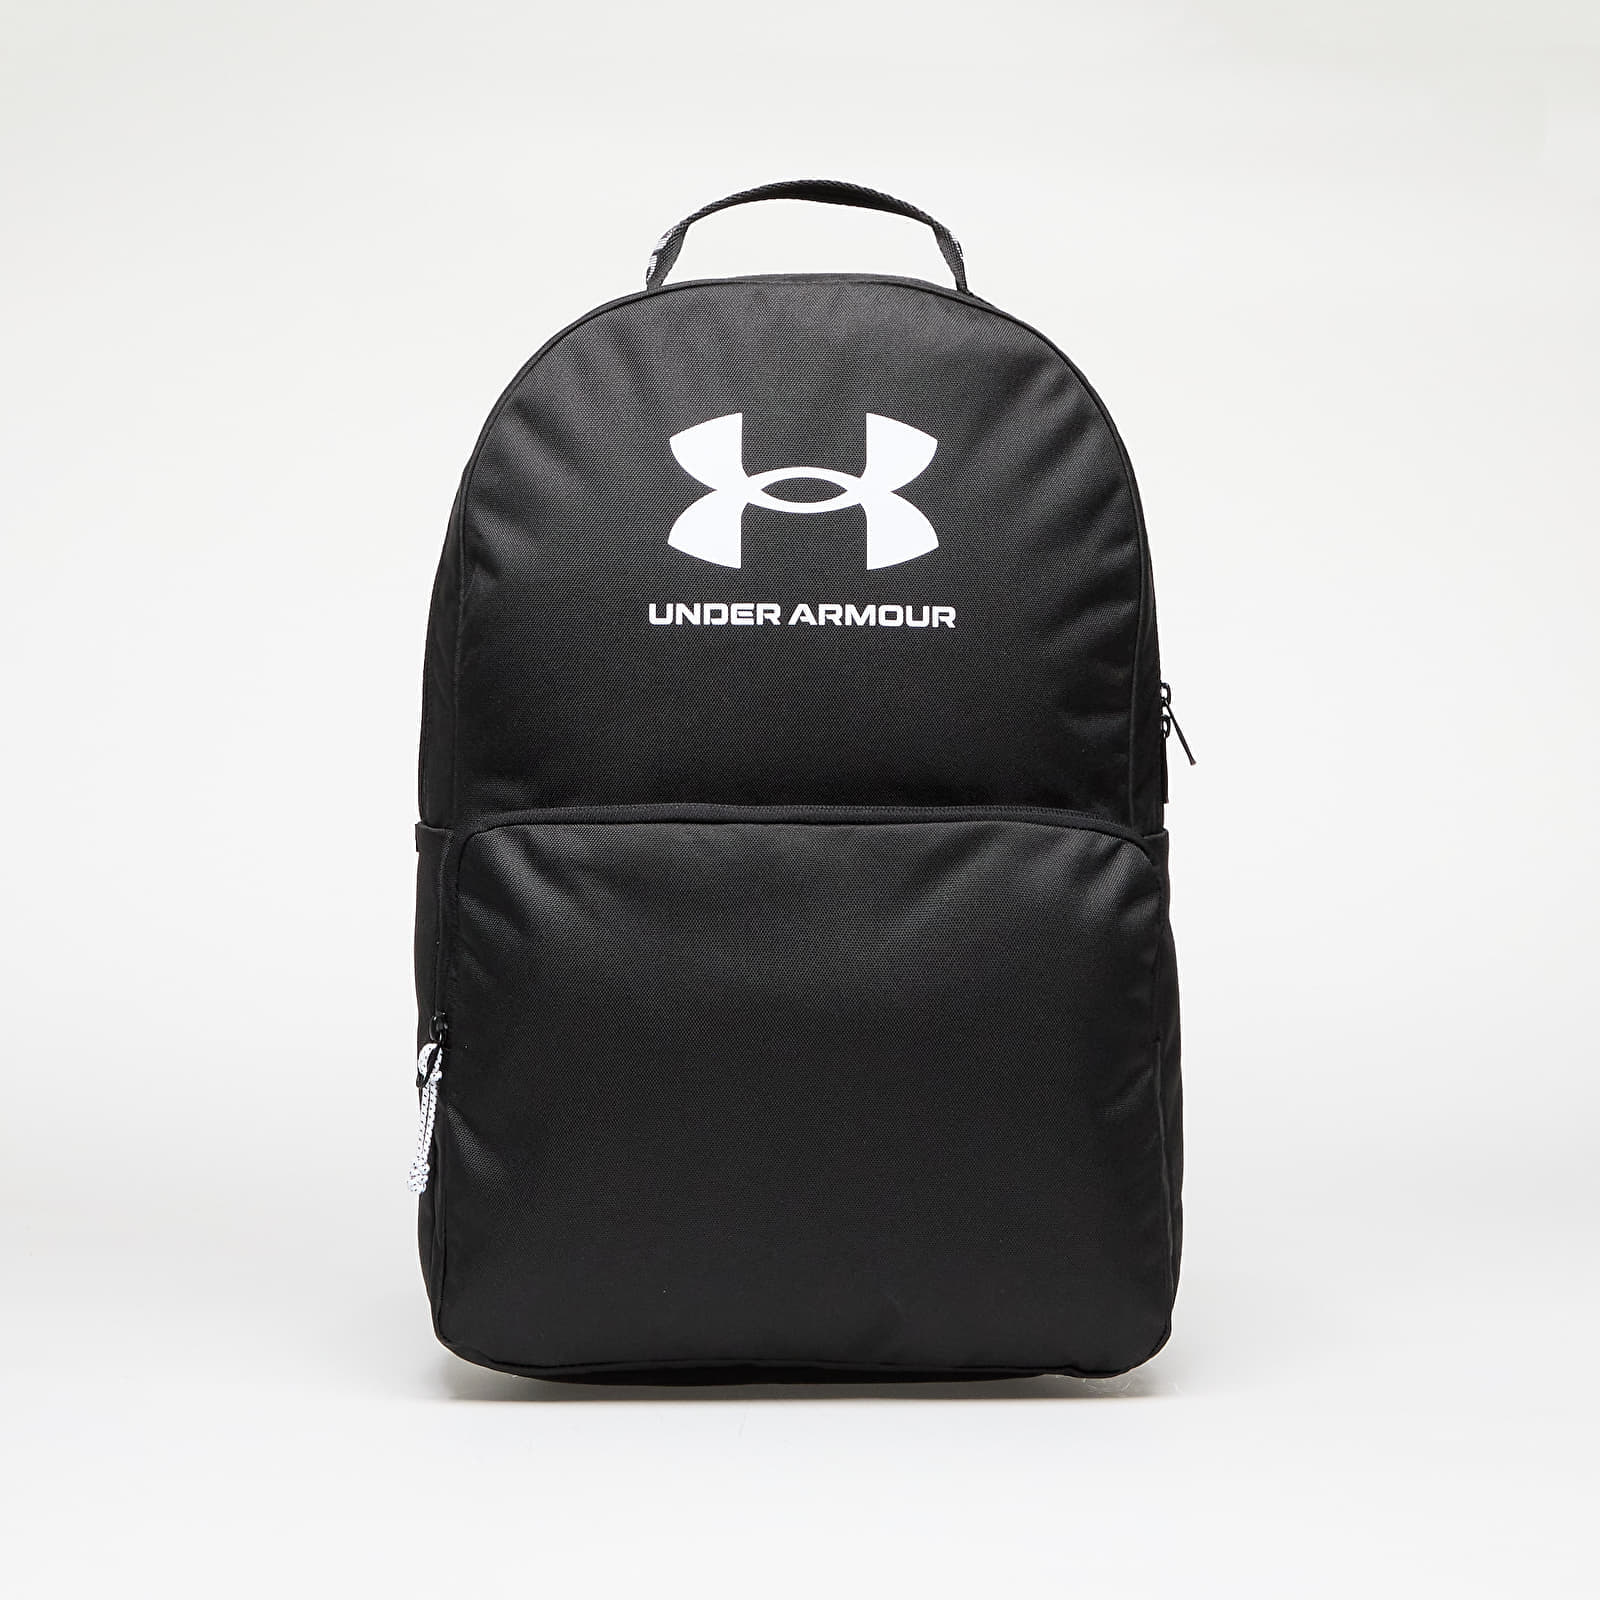 Under Armour - loudon backpack black